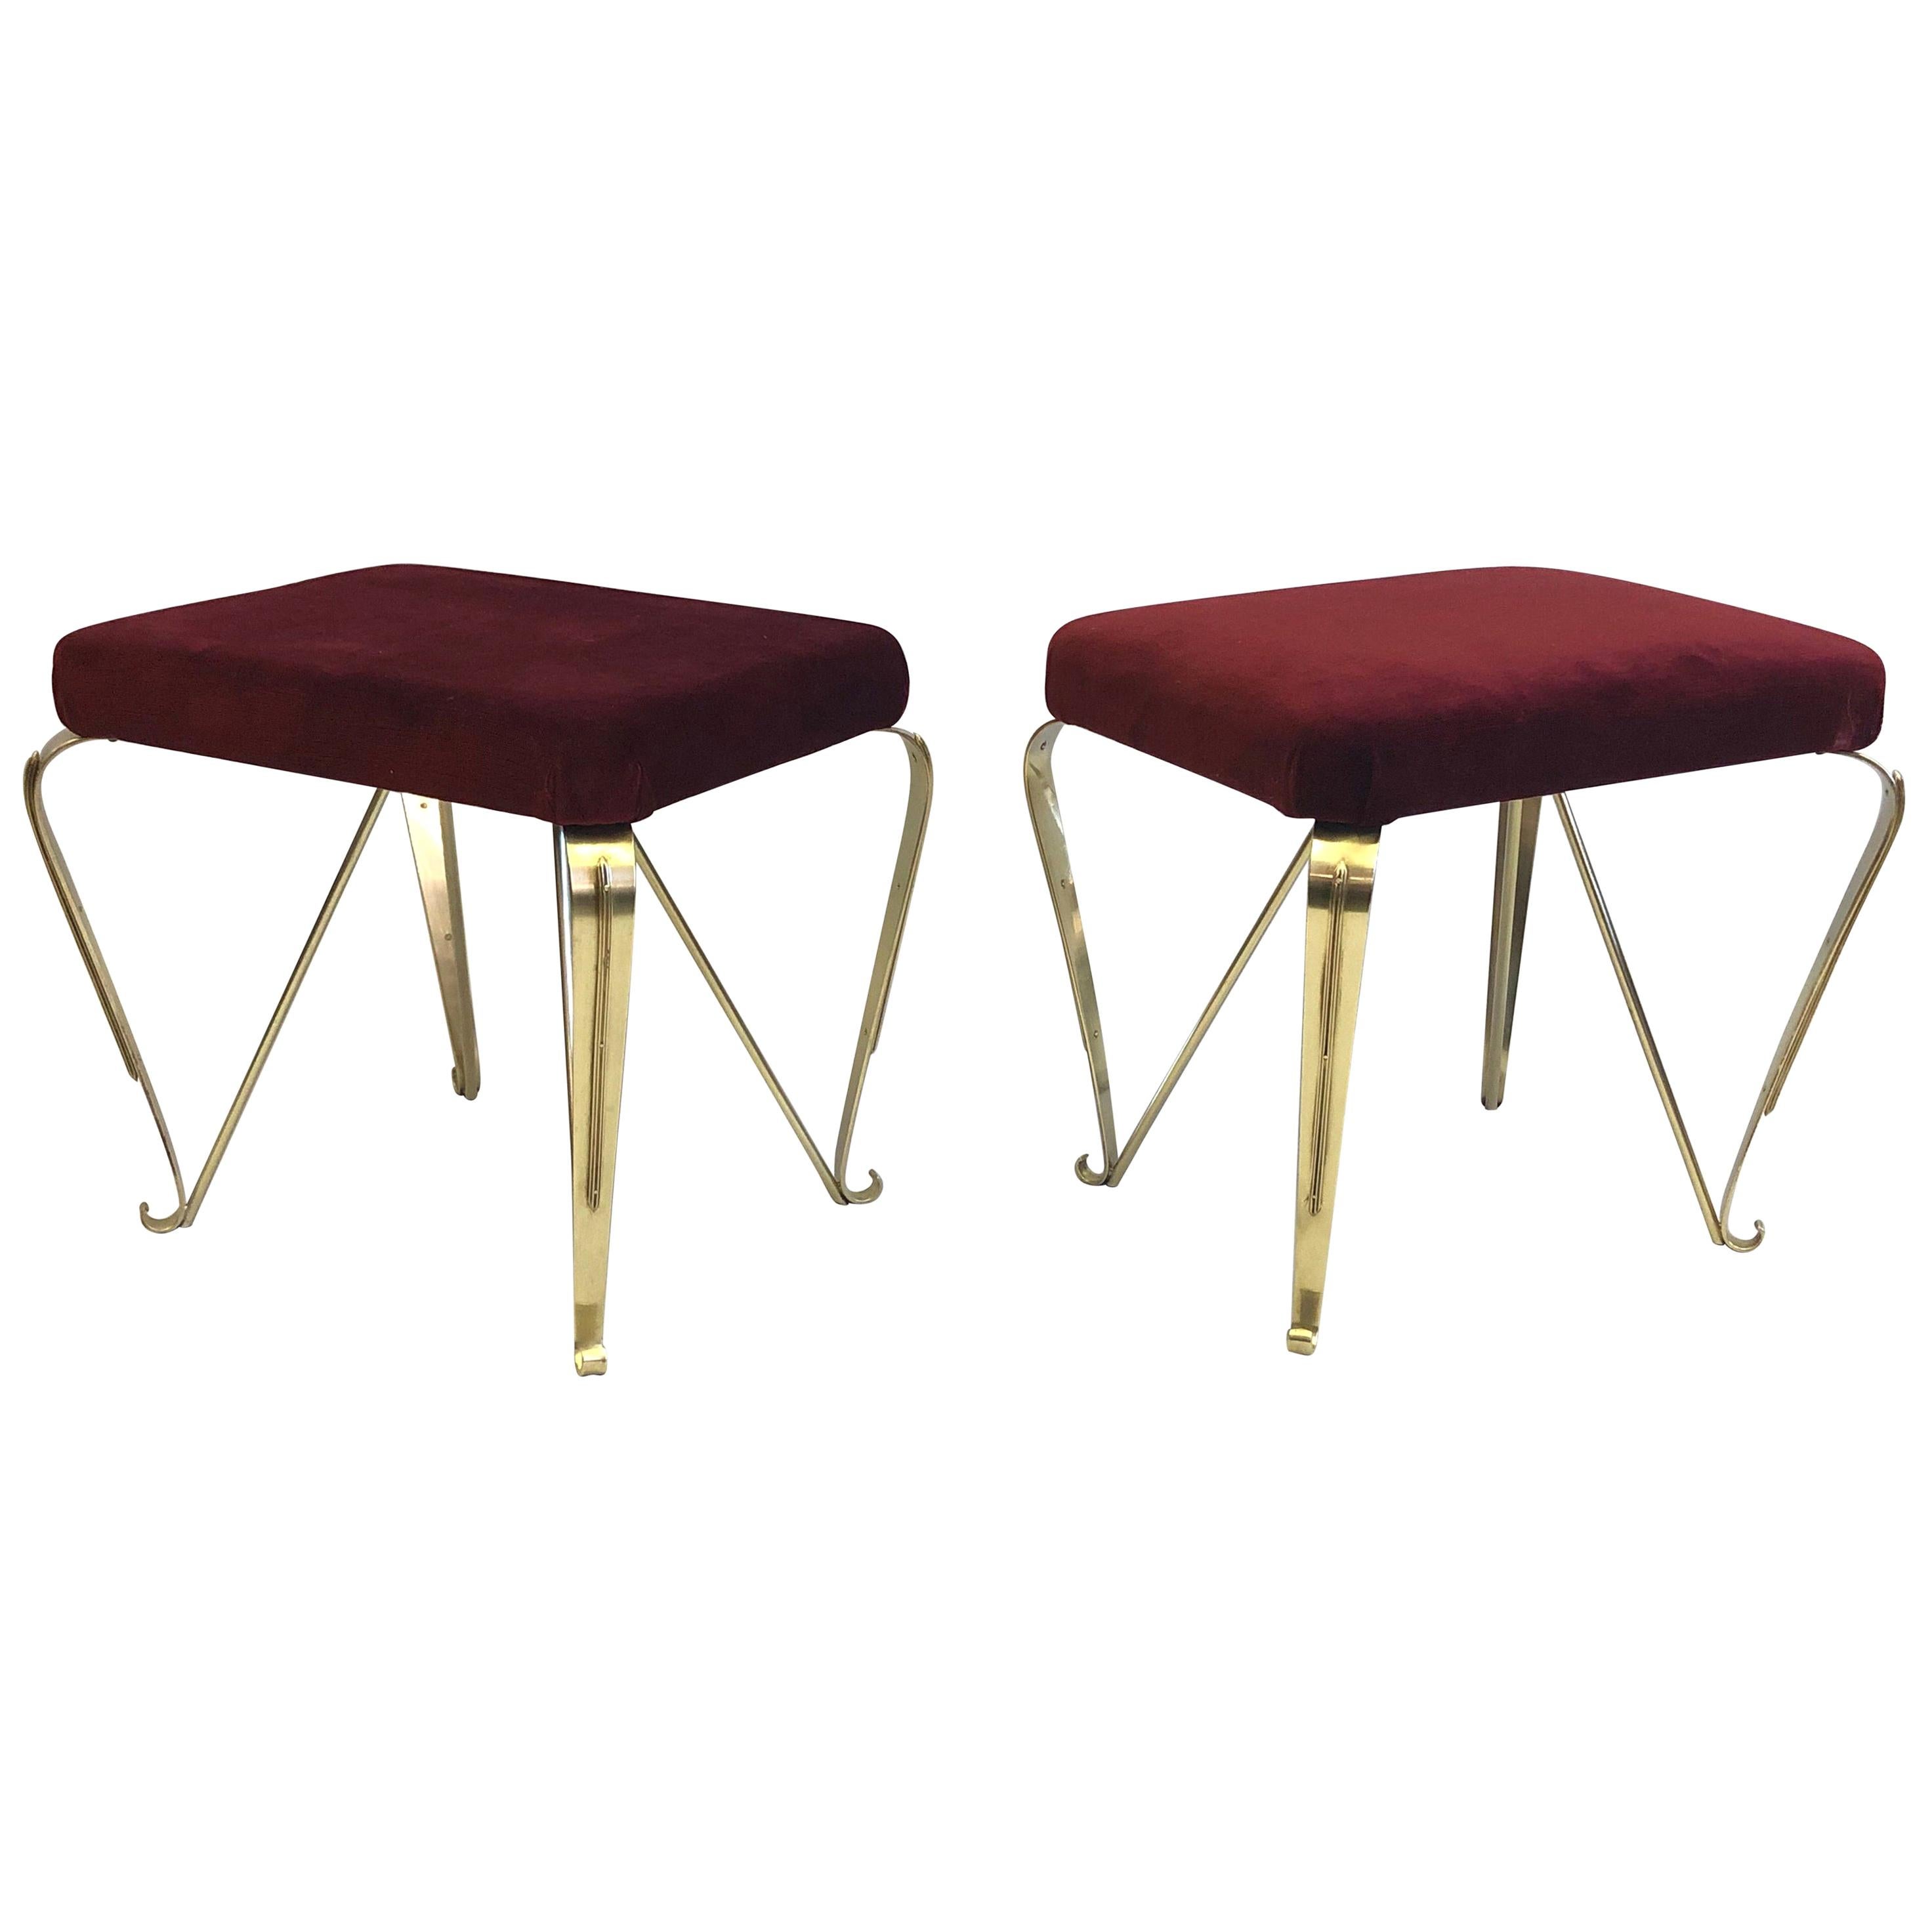 Pair of Italian Mid-Century Modern Neoclassical Solid Brass Benches by Jansen